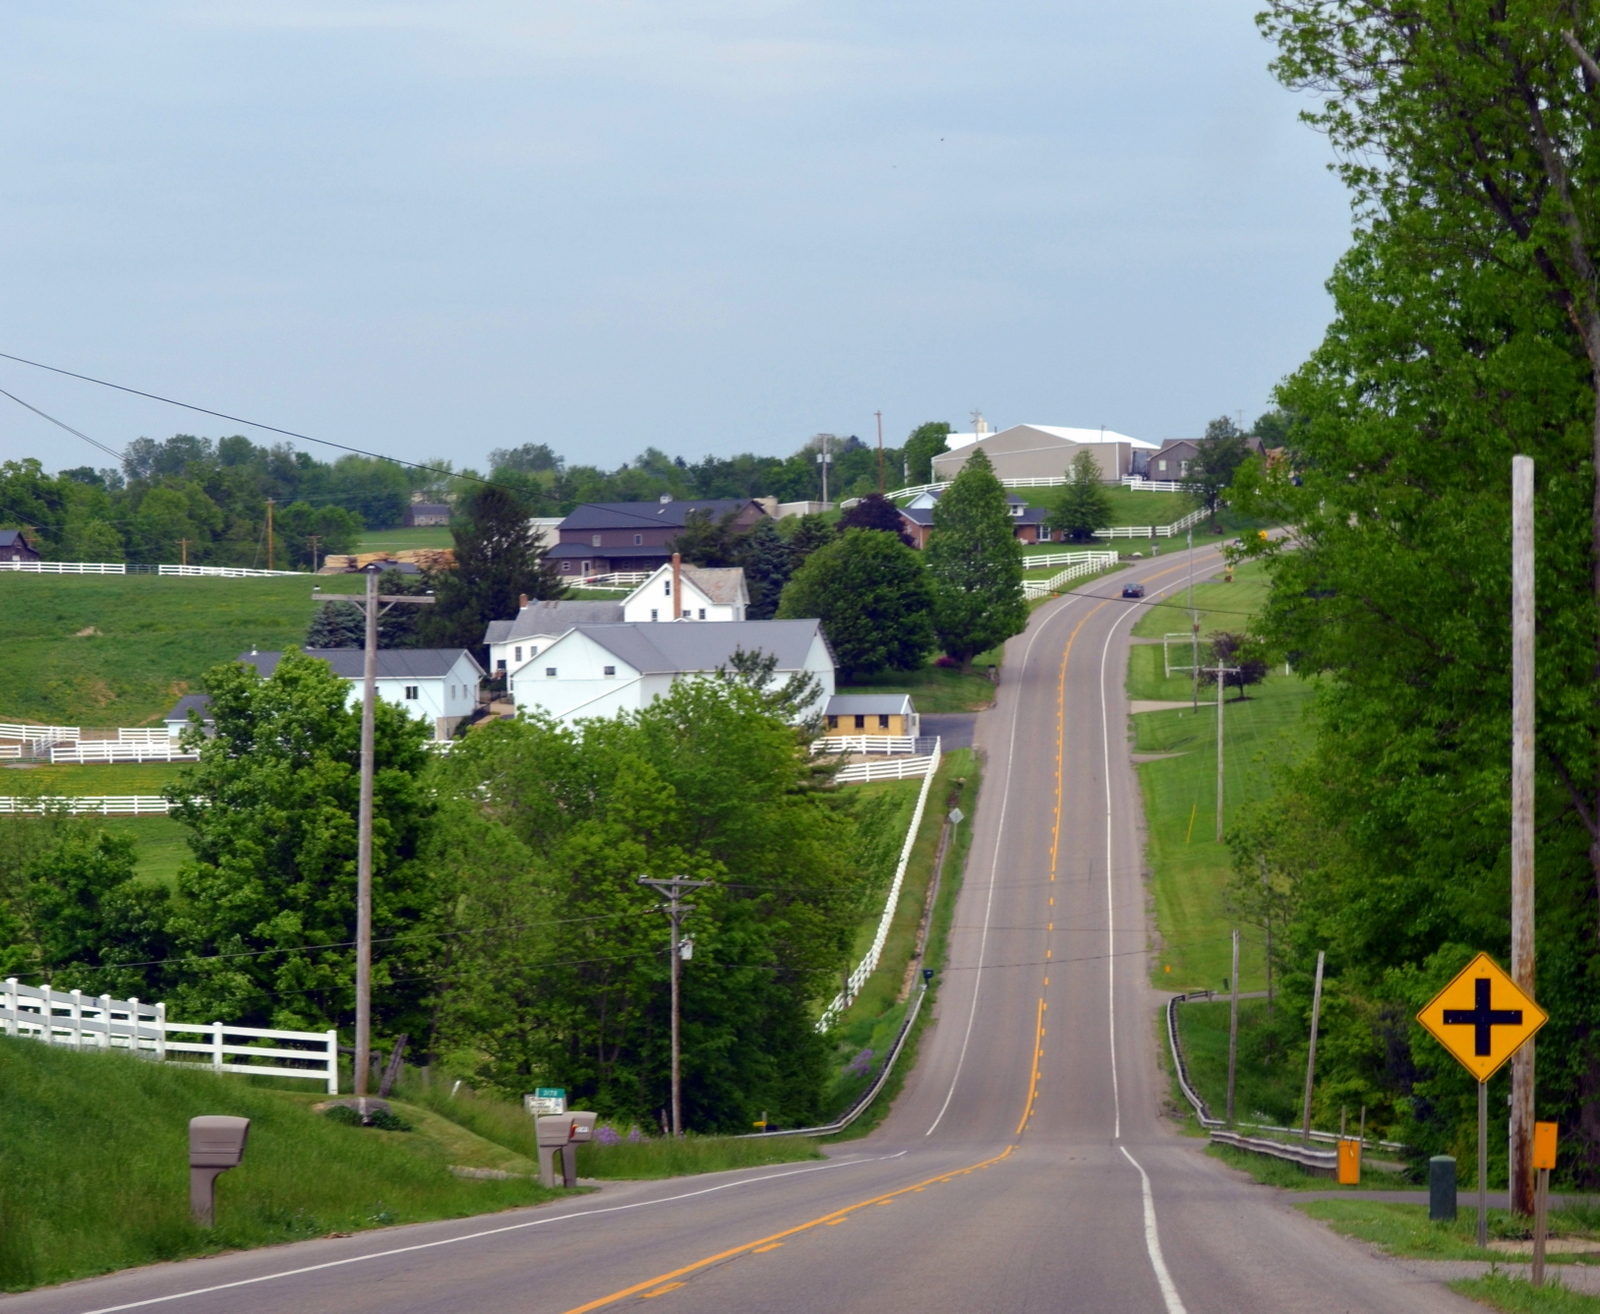 Amish Country in Ohio